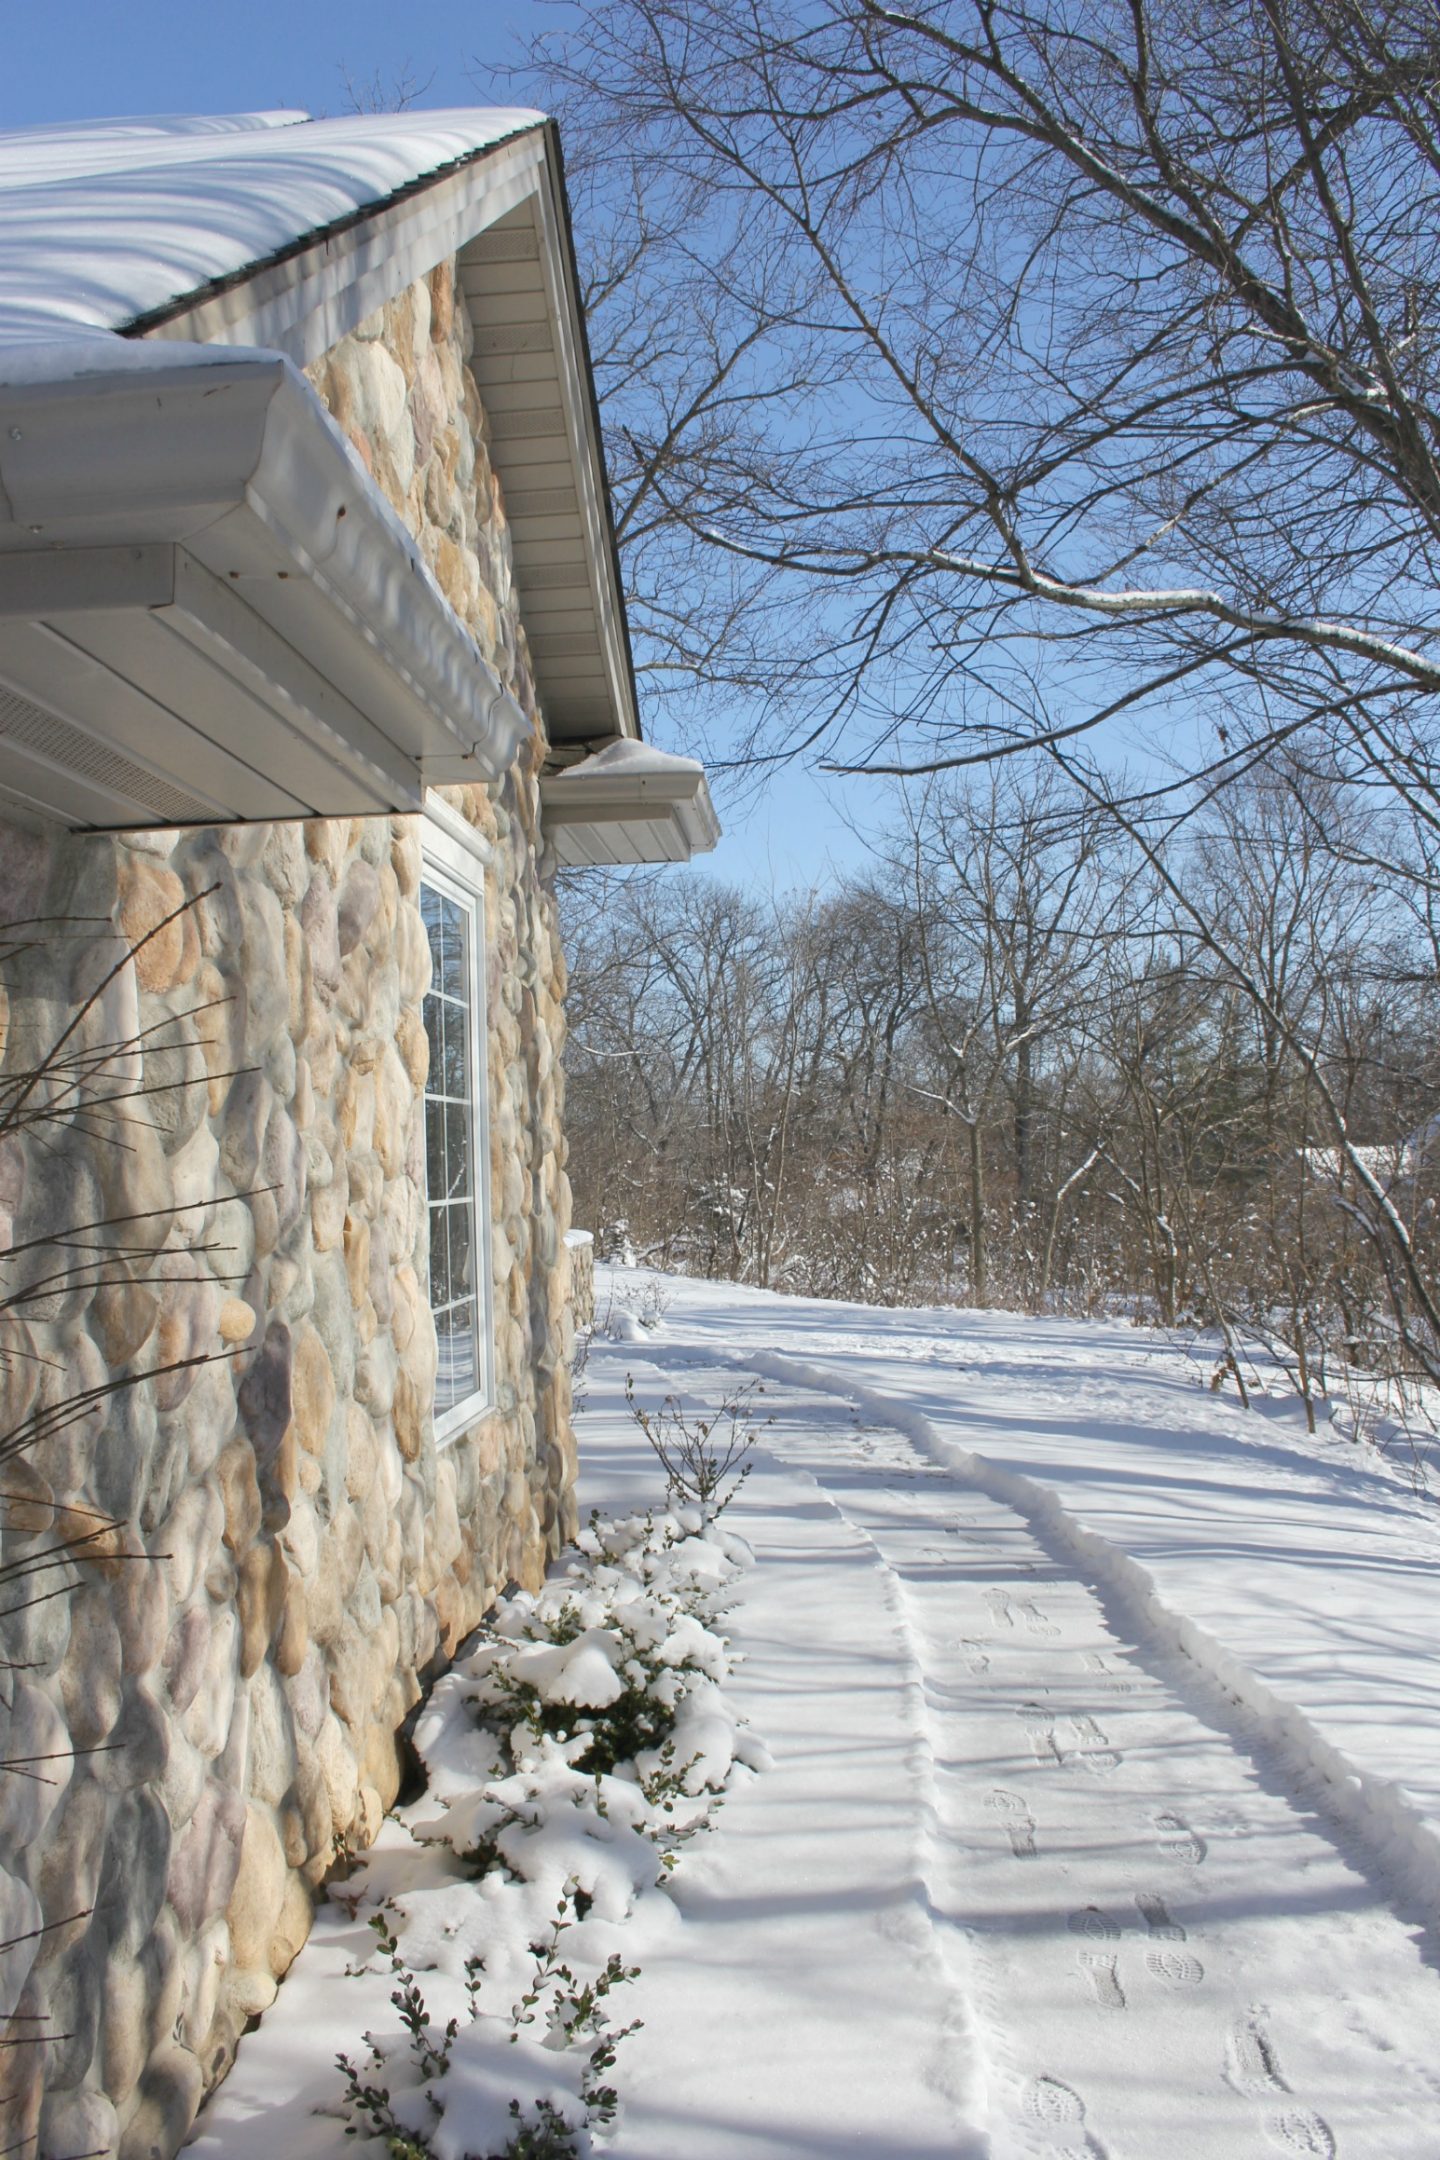 Snowy exterior of our cozy home in winter - Hello Lovely Studio.